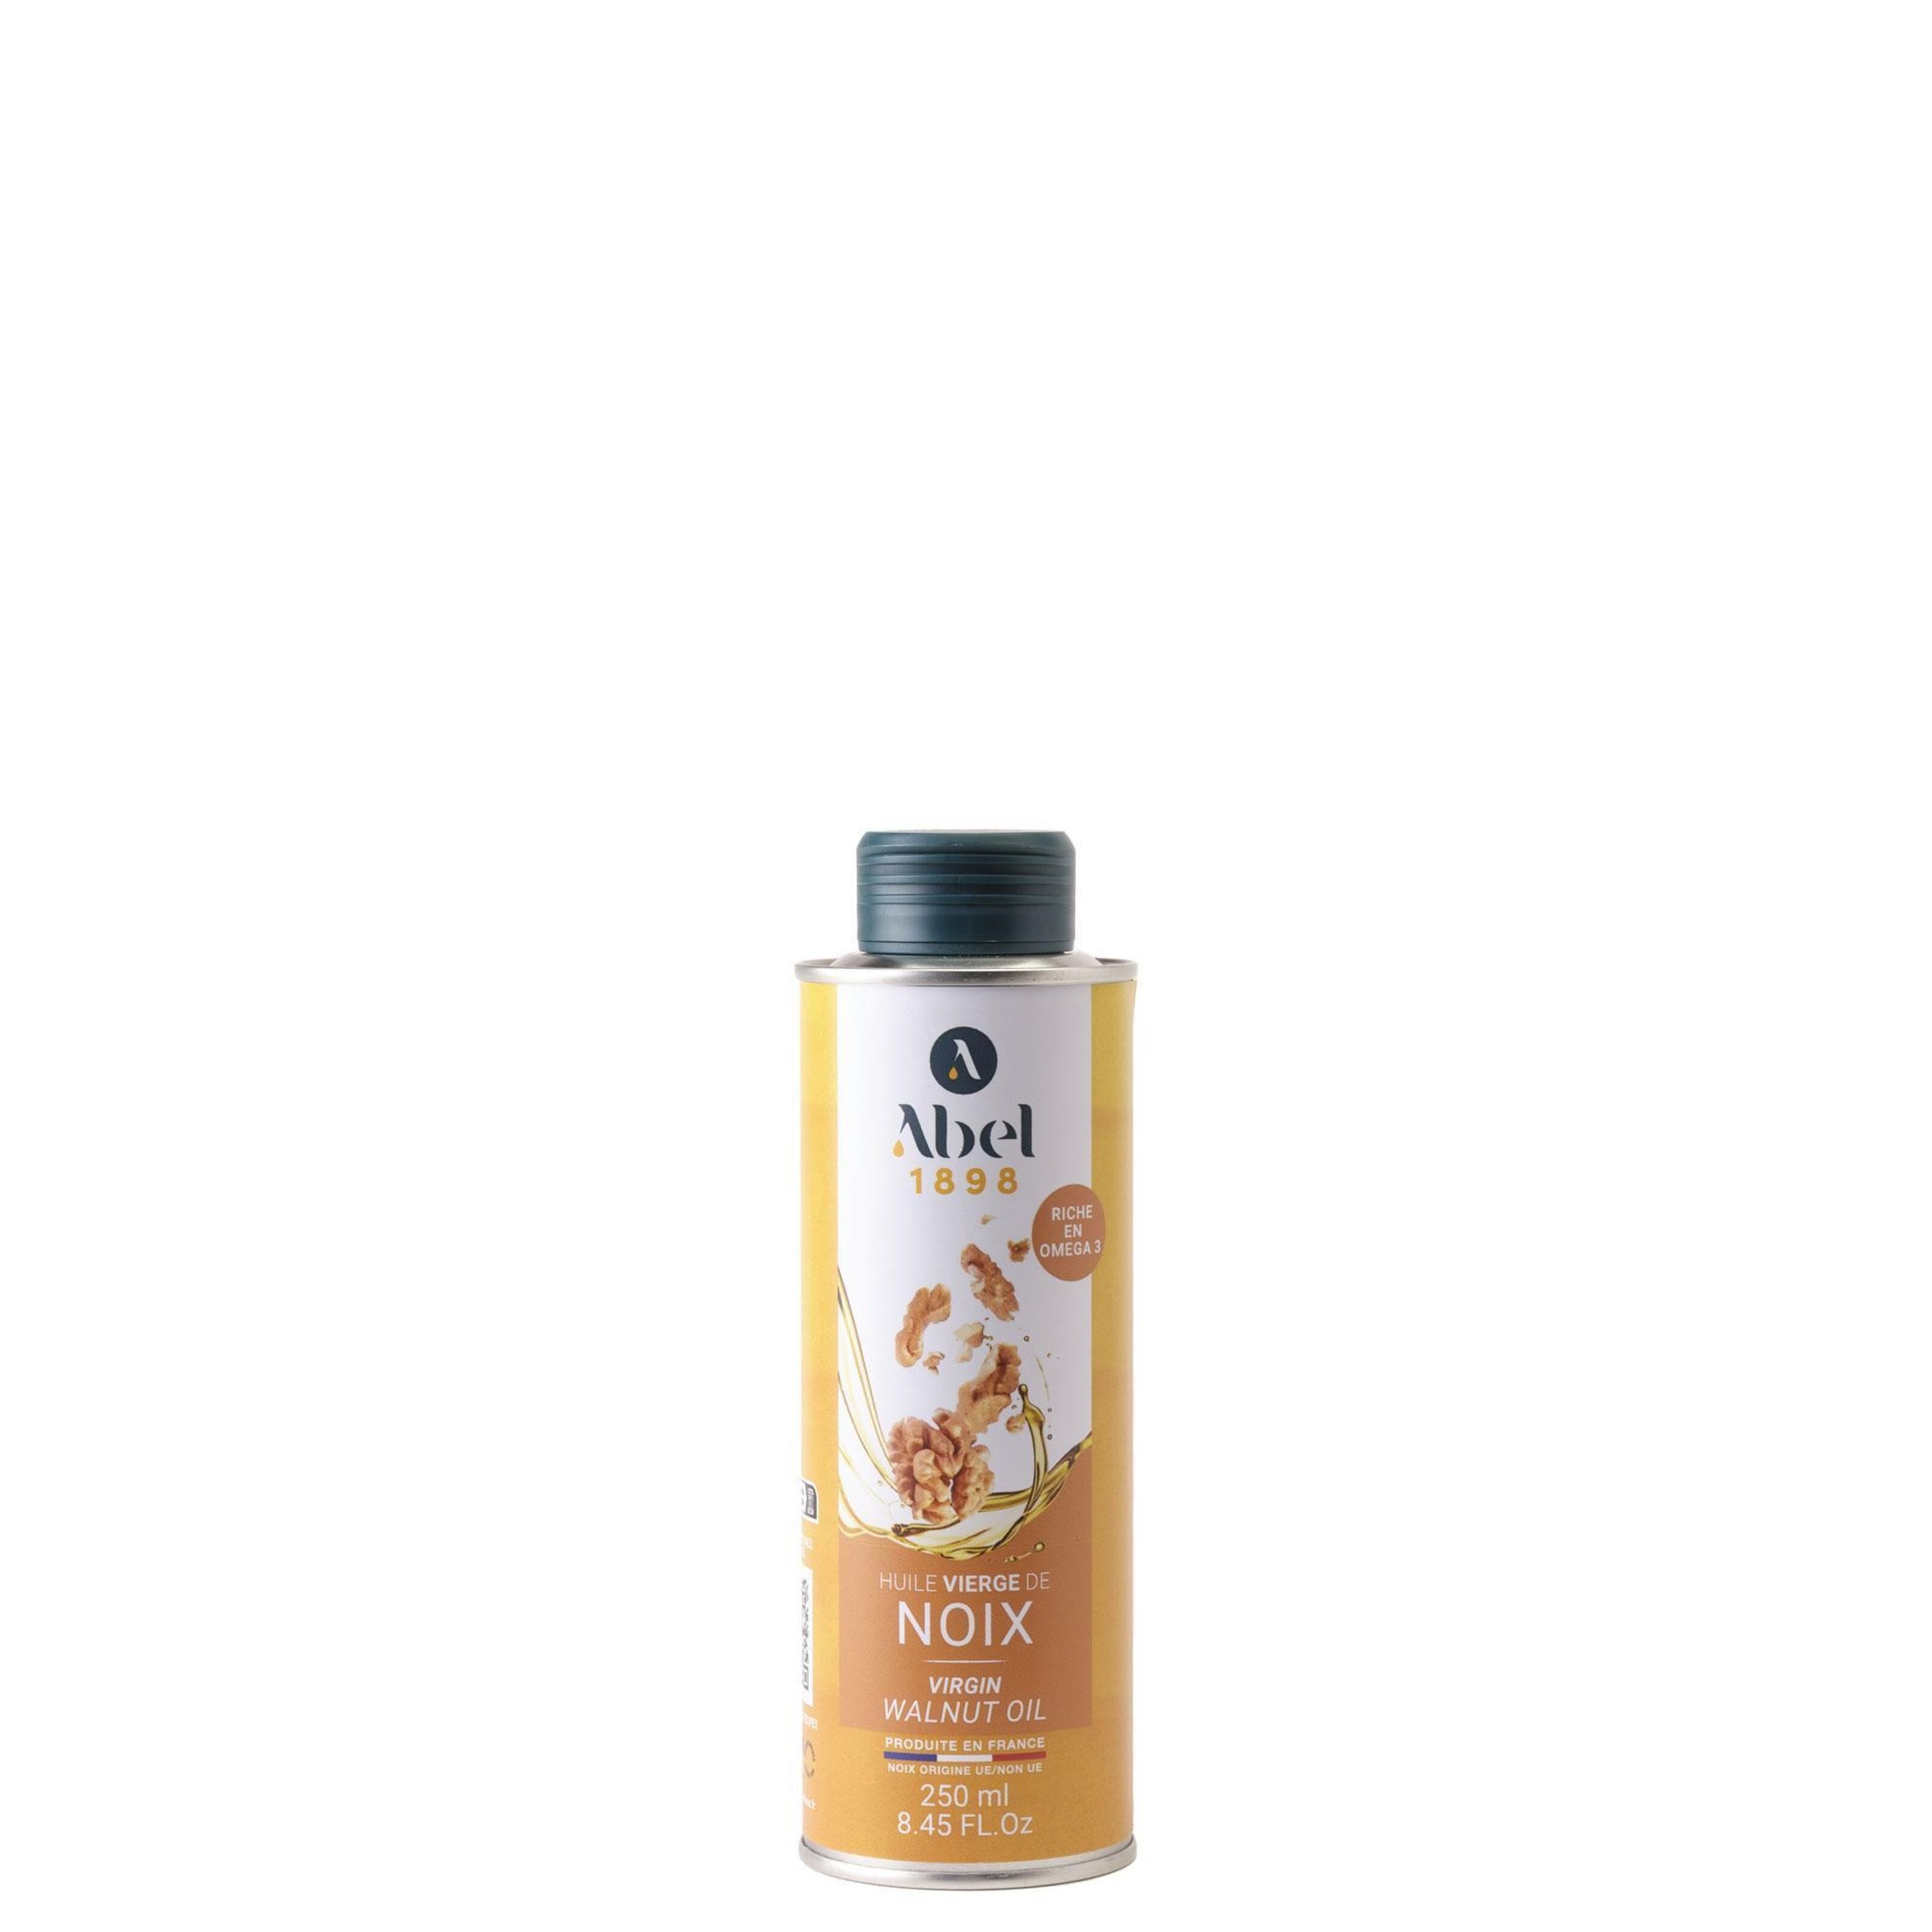 Huile d'olive Picholine vierge extra BIO Oleisys® 750 ml